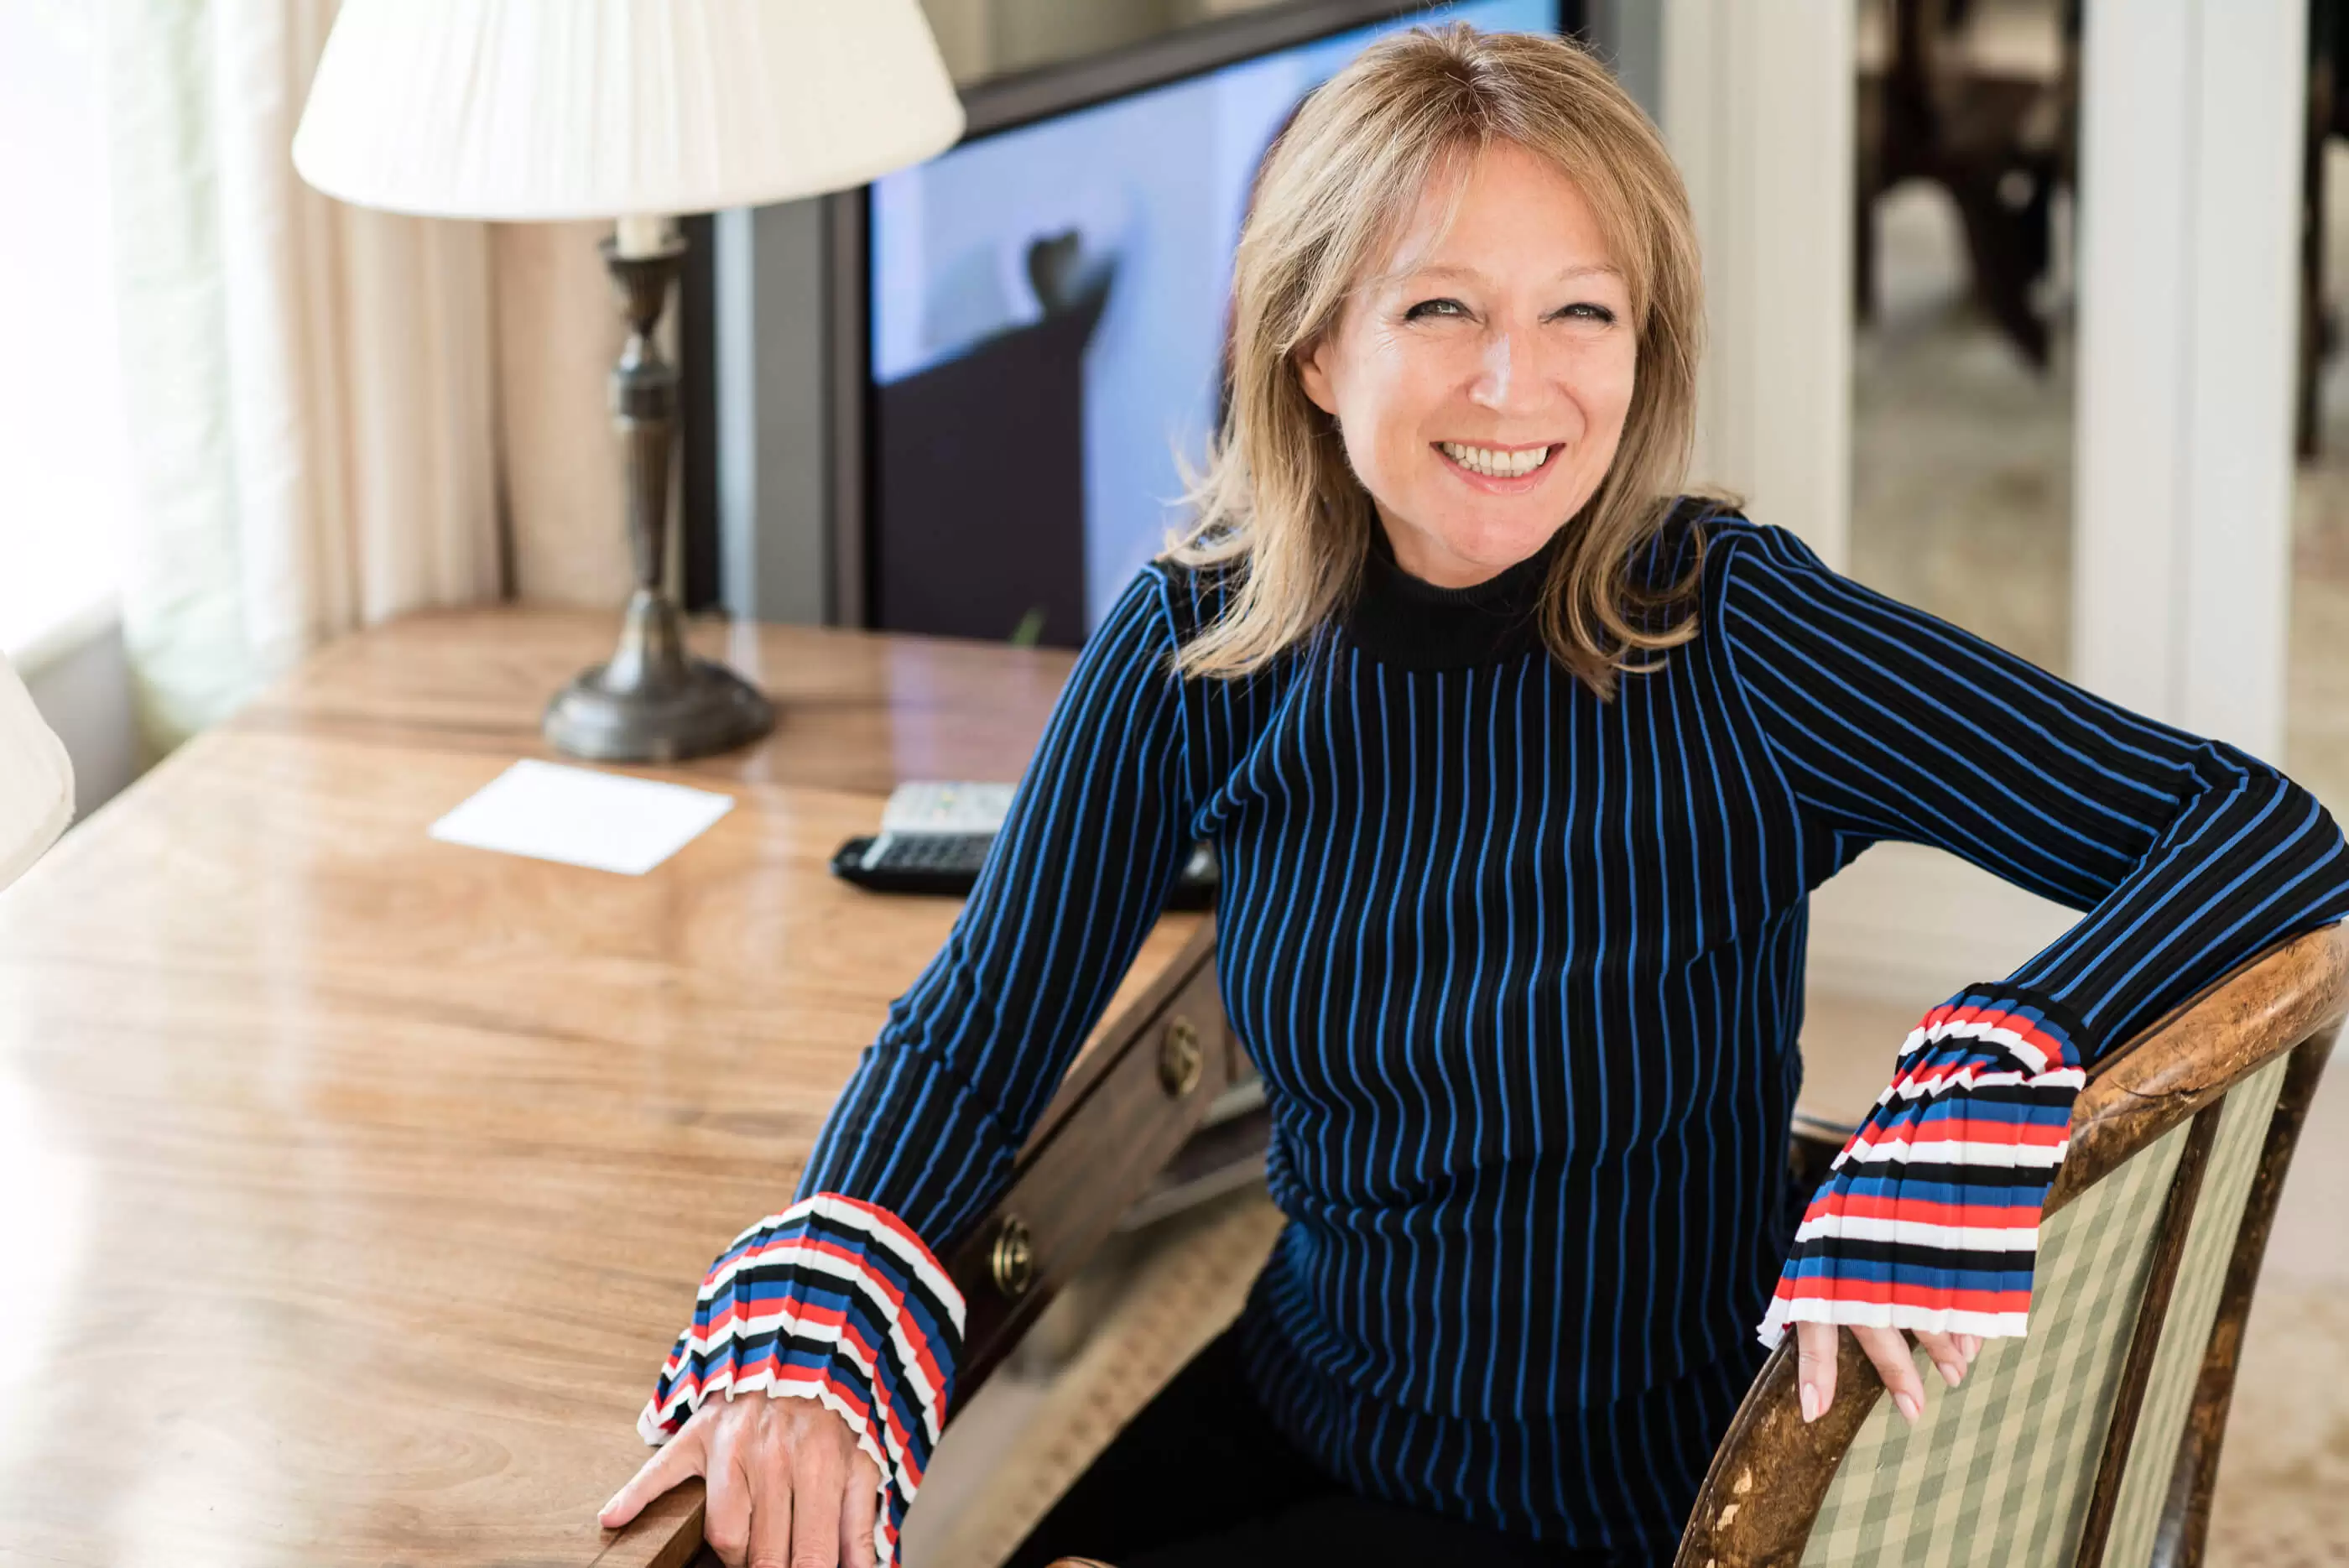 Rita Clifton CBE, co-founder of BrandCap, smiling at the camera in a blue and black striped top.